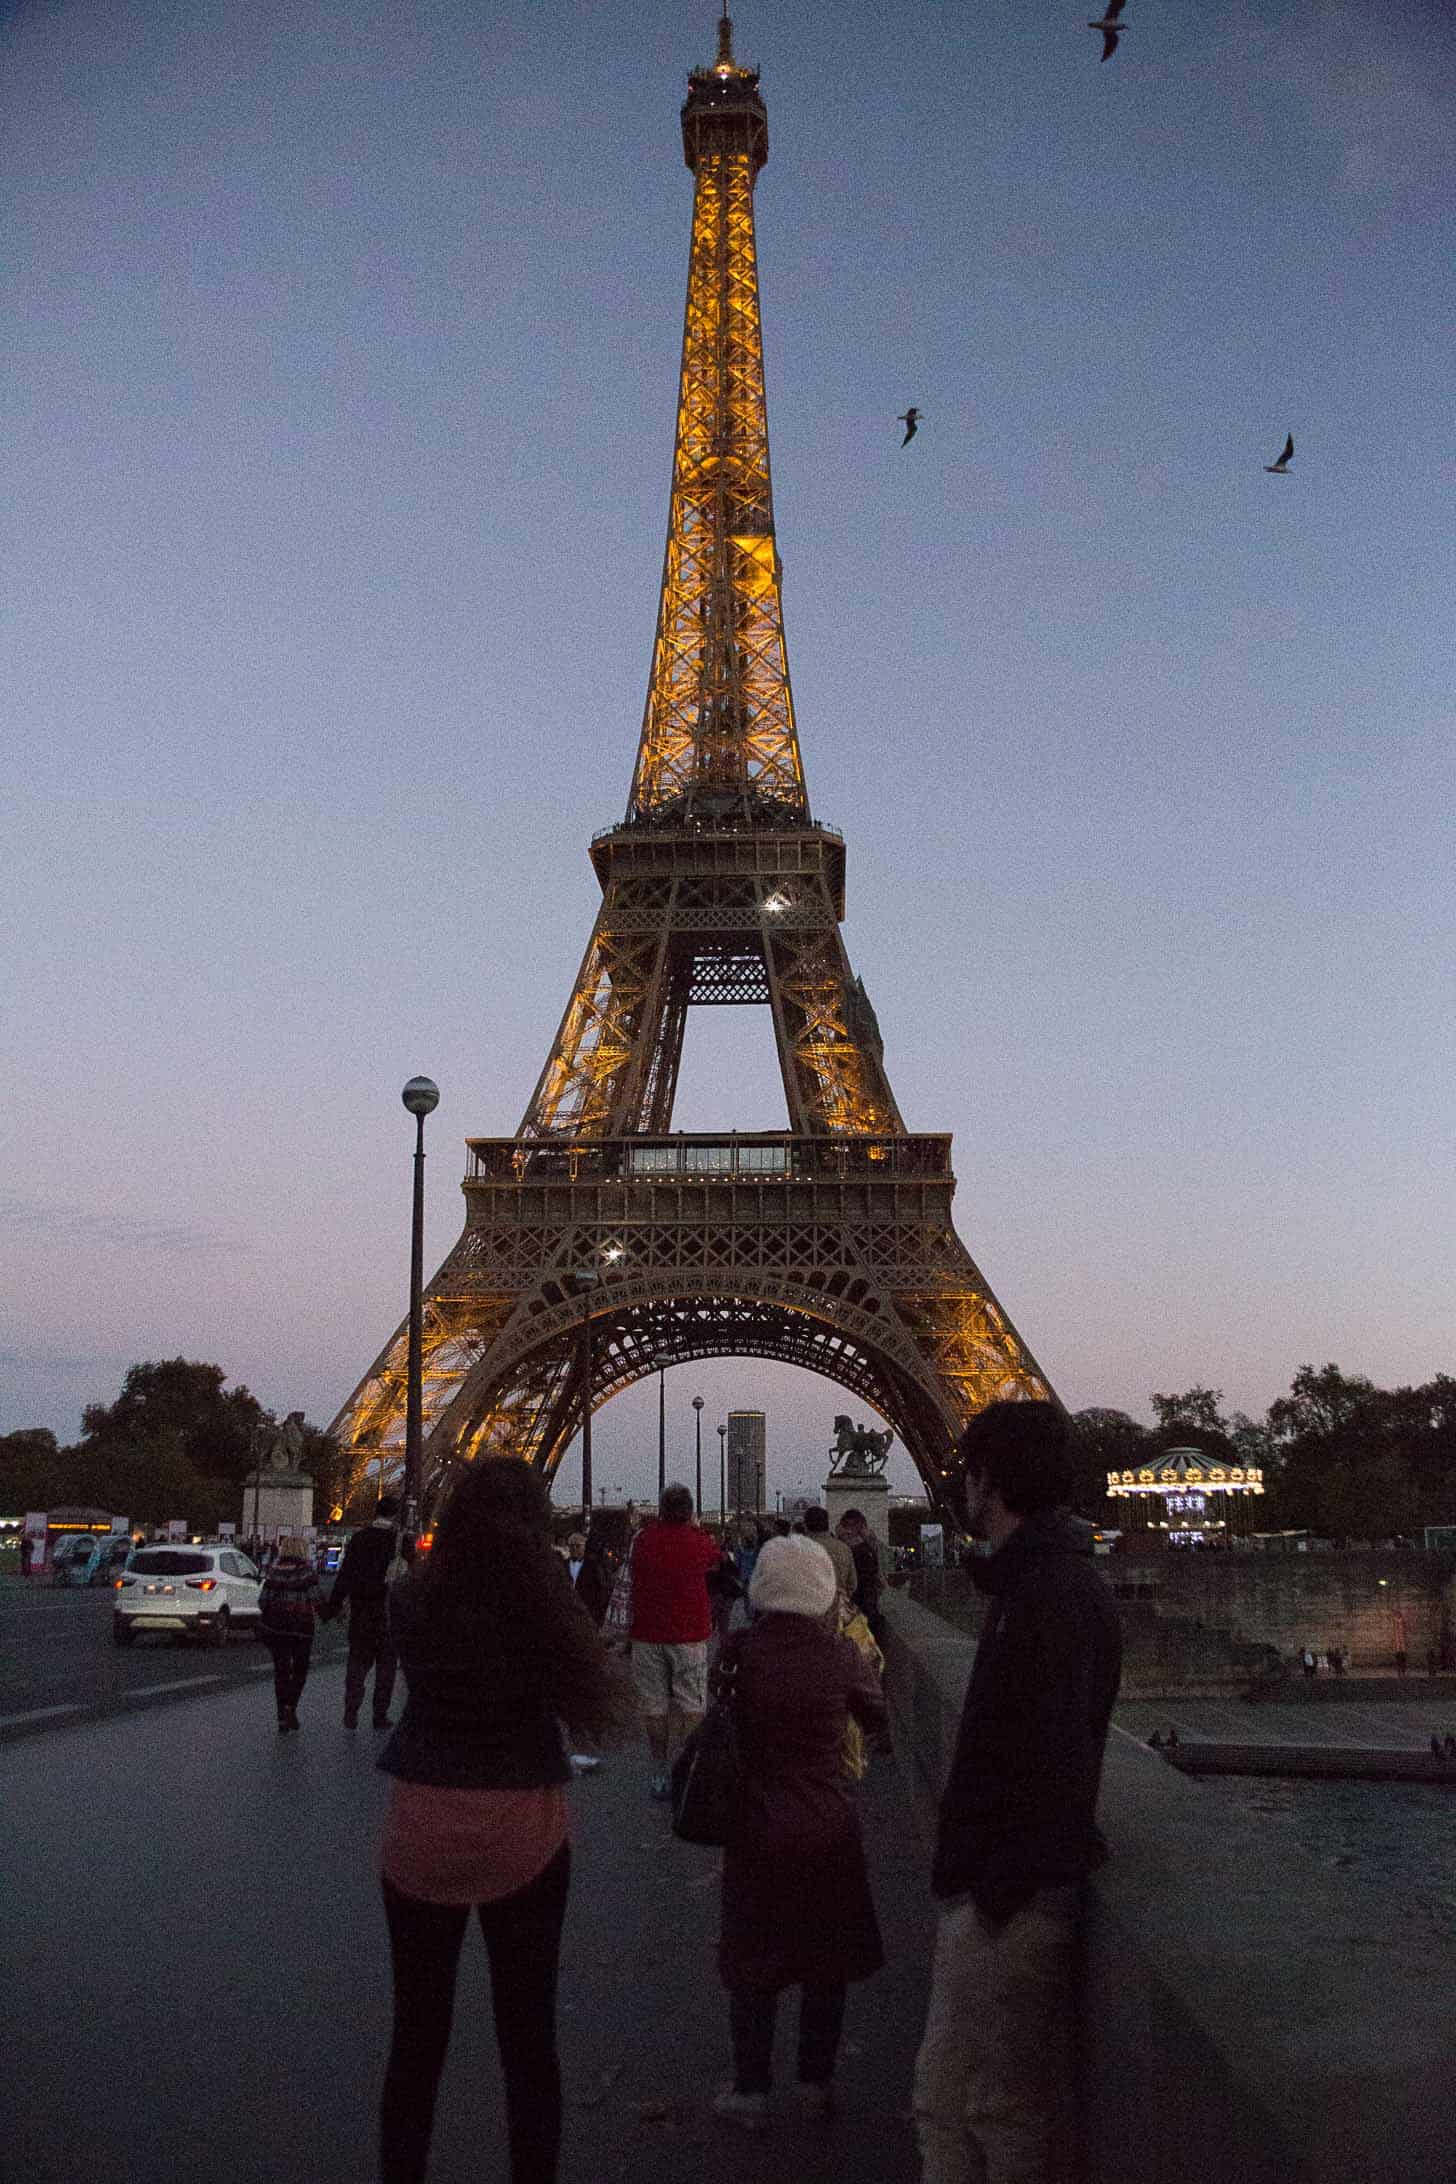 the Eiffel Tower lit at night